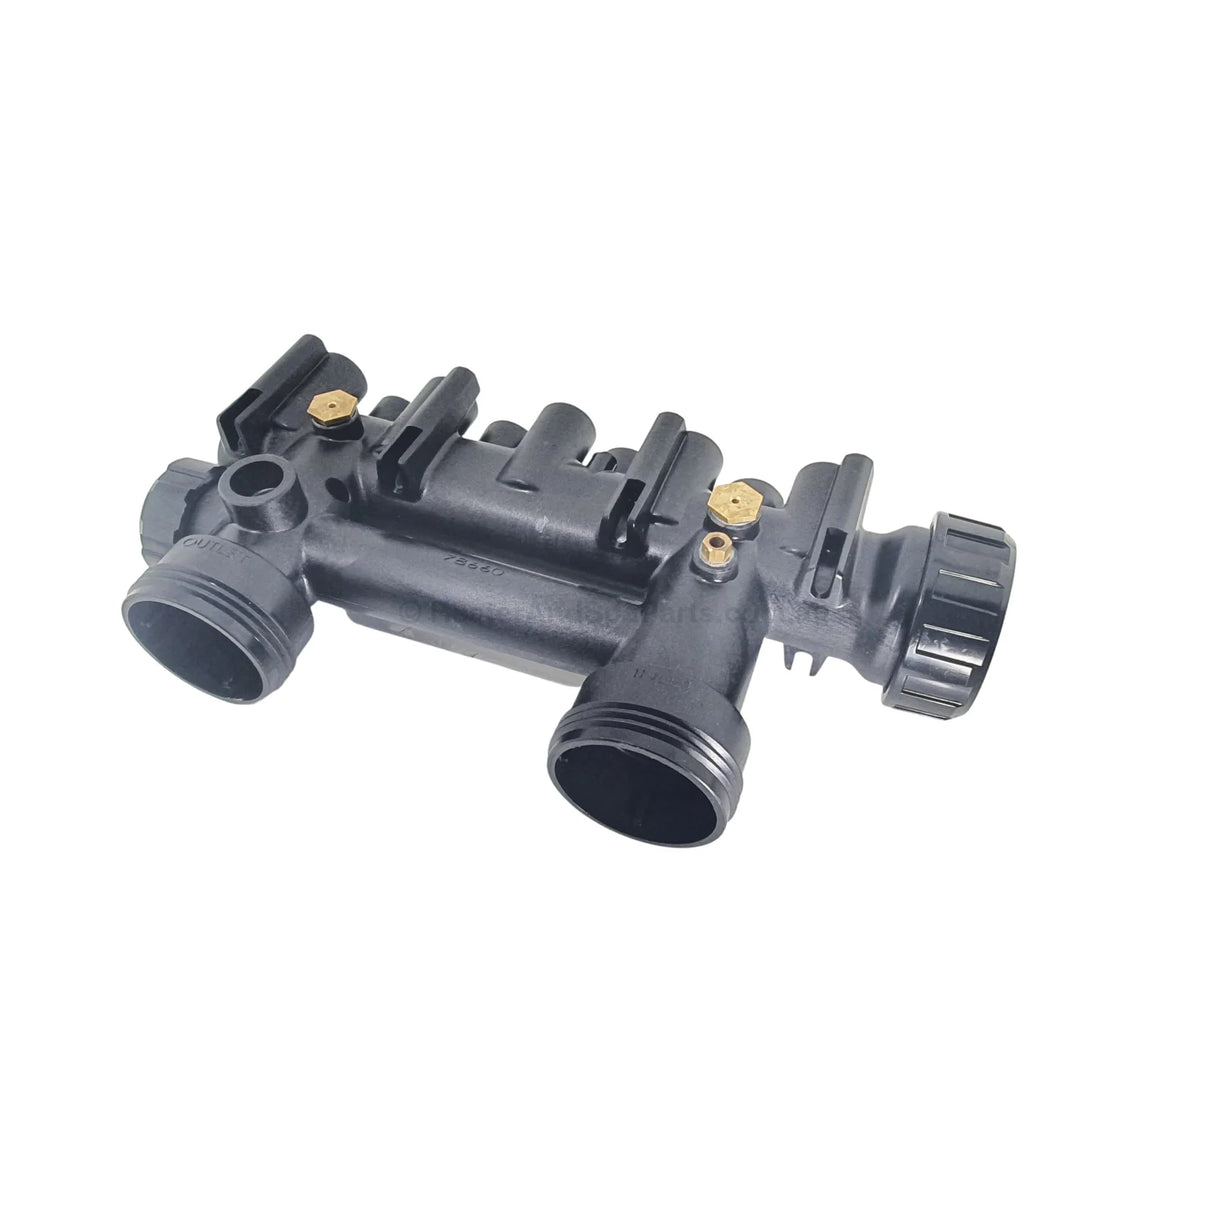 Hinrg 400 In Out Manifold Header - Inlet / Outlet Mkii Or Series 2